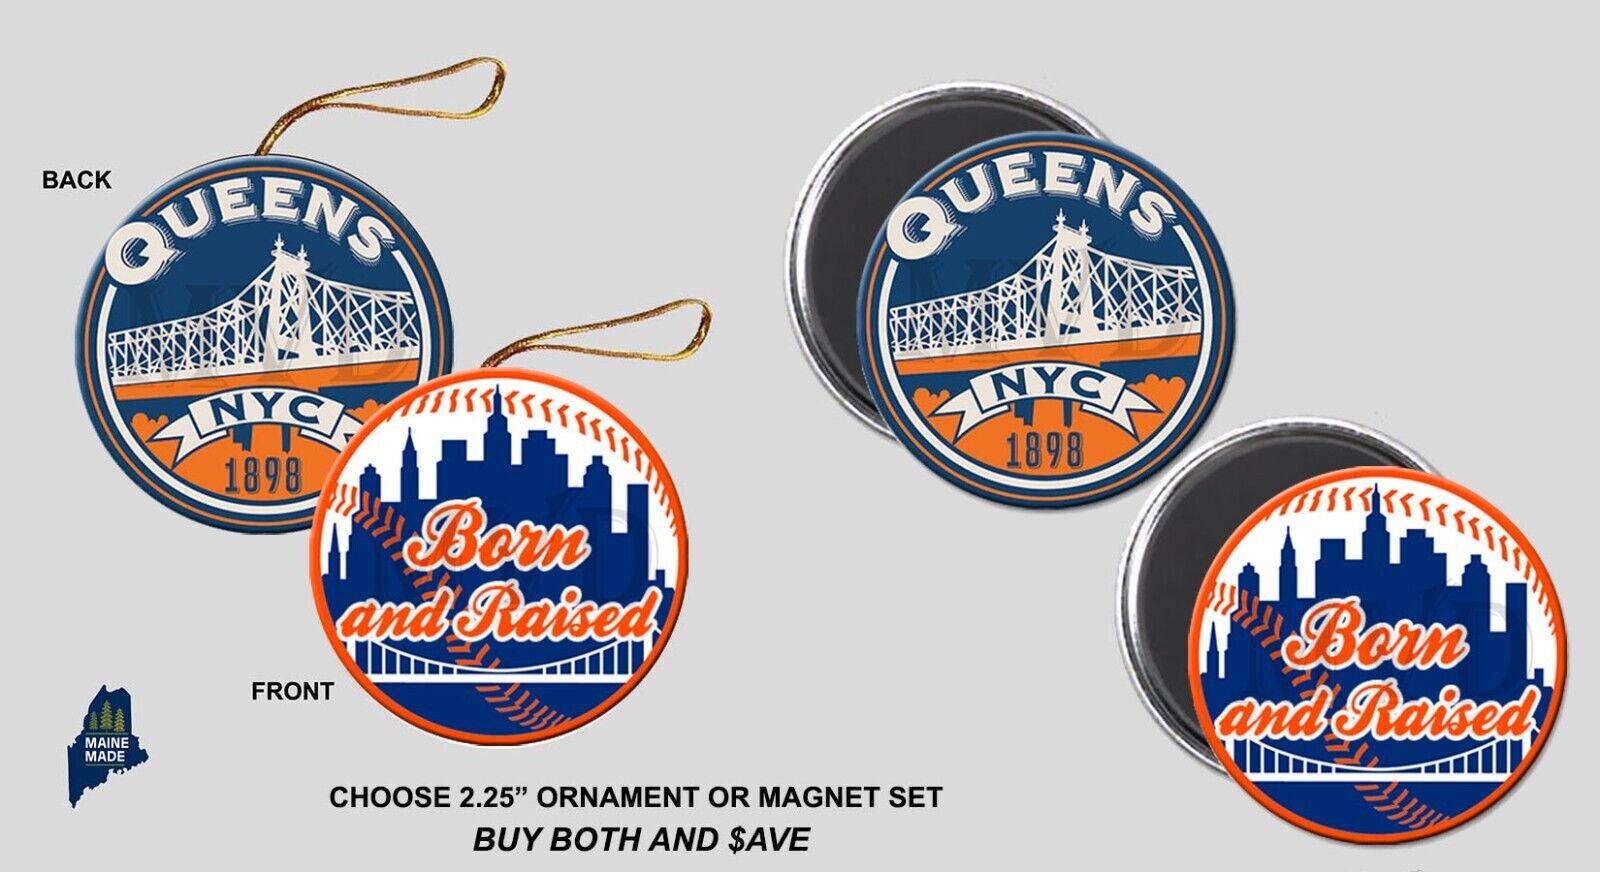 BORN & RAISED QUEENS NY Collectibles - New York Flushing Astoria Elmhurst Mets